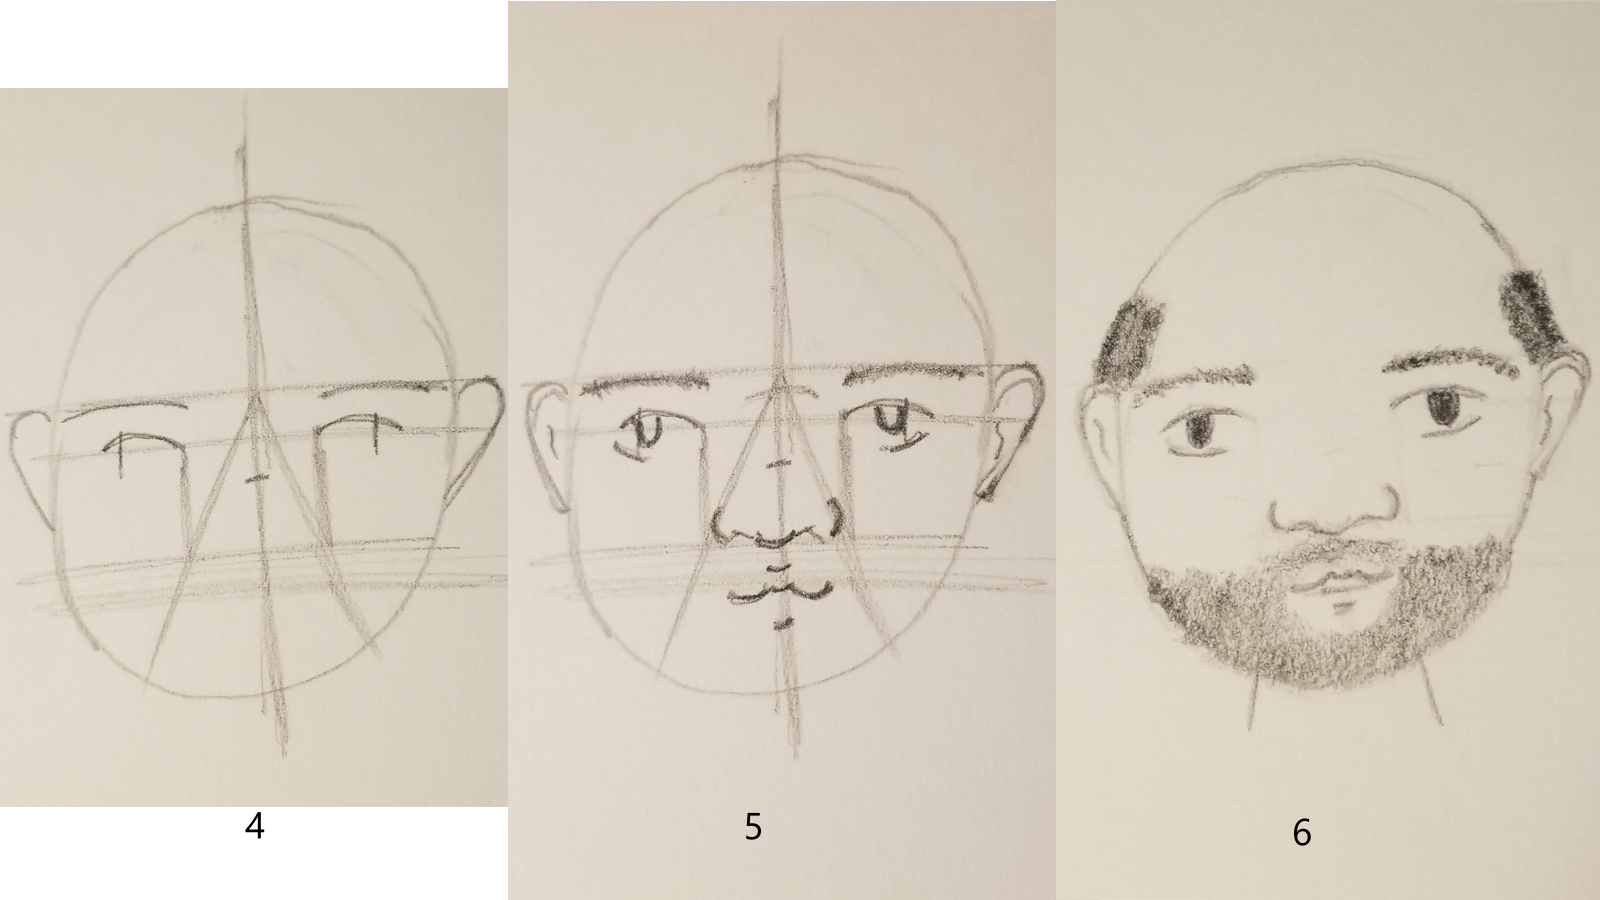 Pencil drawing of the last three steps to drawing a human face.
Step 4: The inner corners of the eyes line up with the outer corners of the nose, where the triangle crosses the nose line.
Step 6: Finishing details like hair.